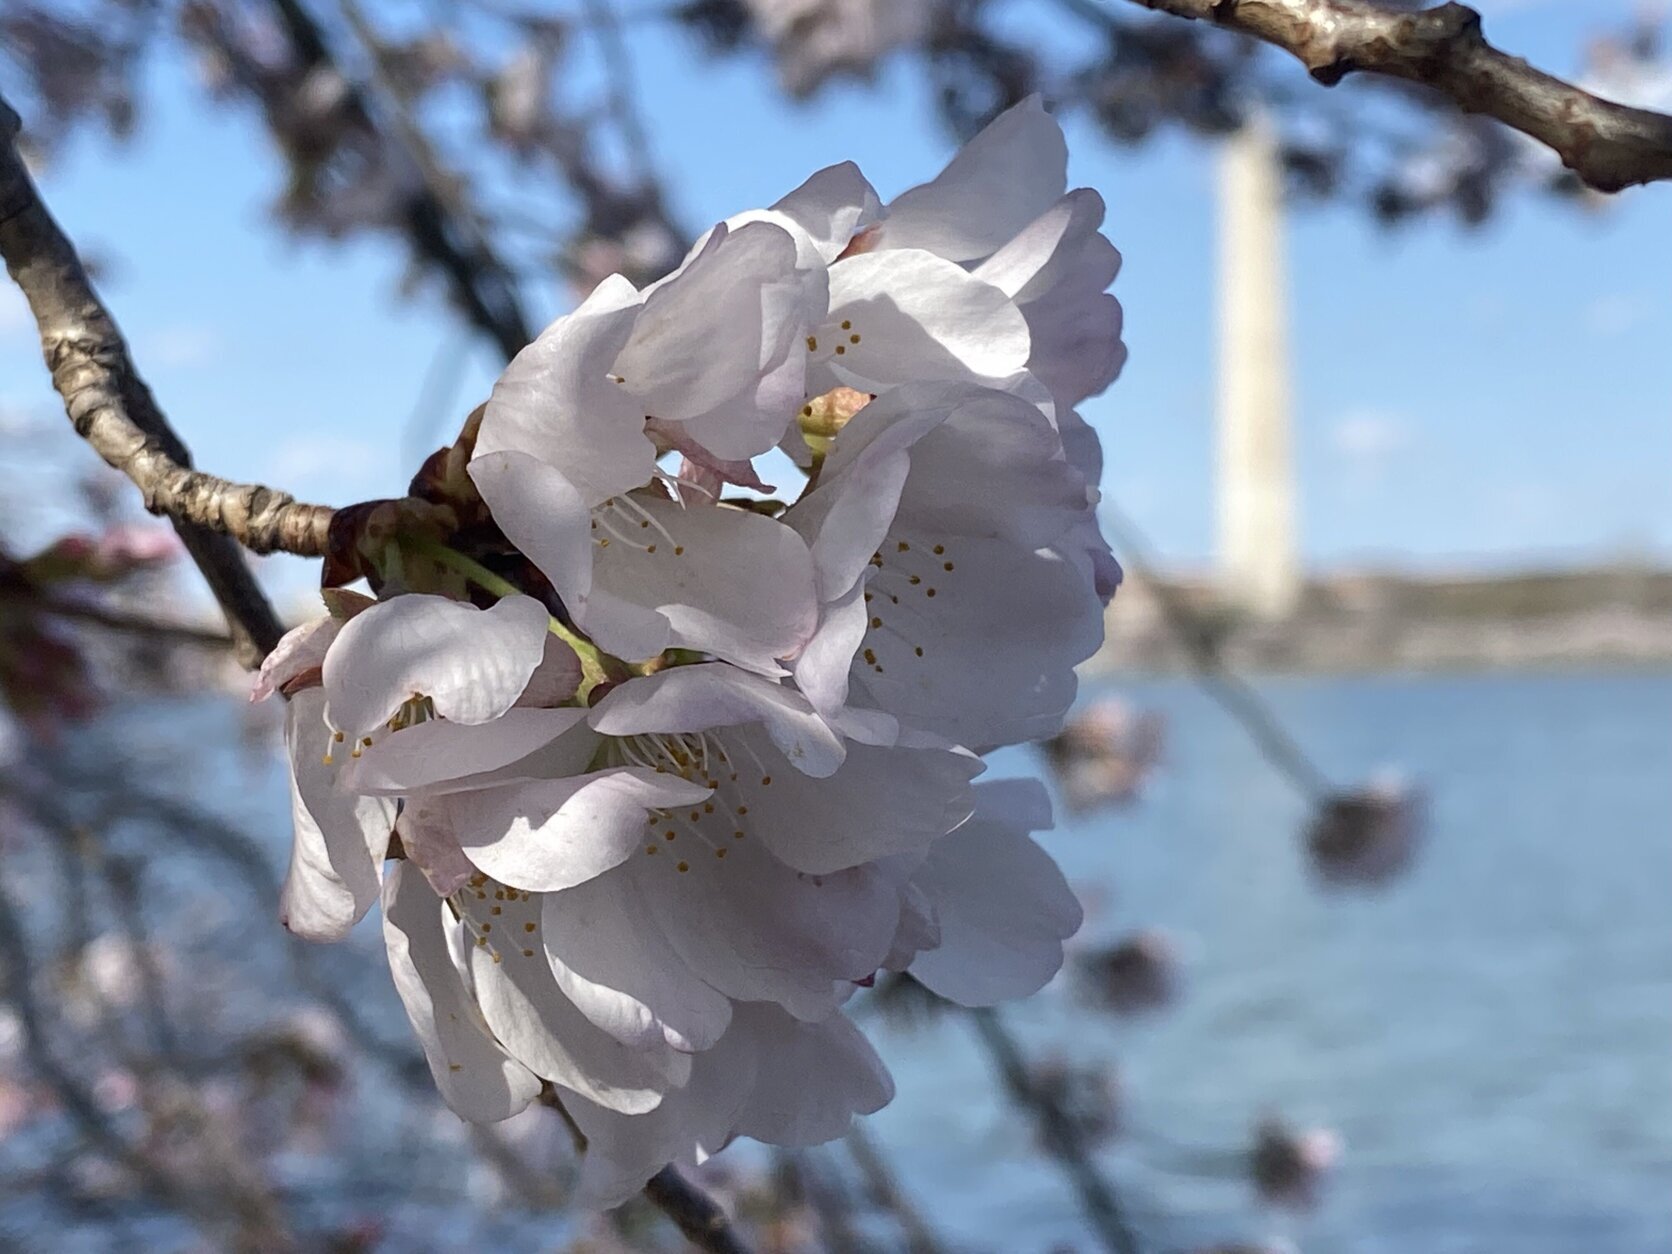 LSU Garden News: Cherry trees are showstoppers in the landscape